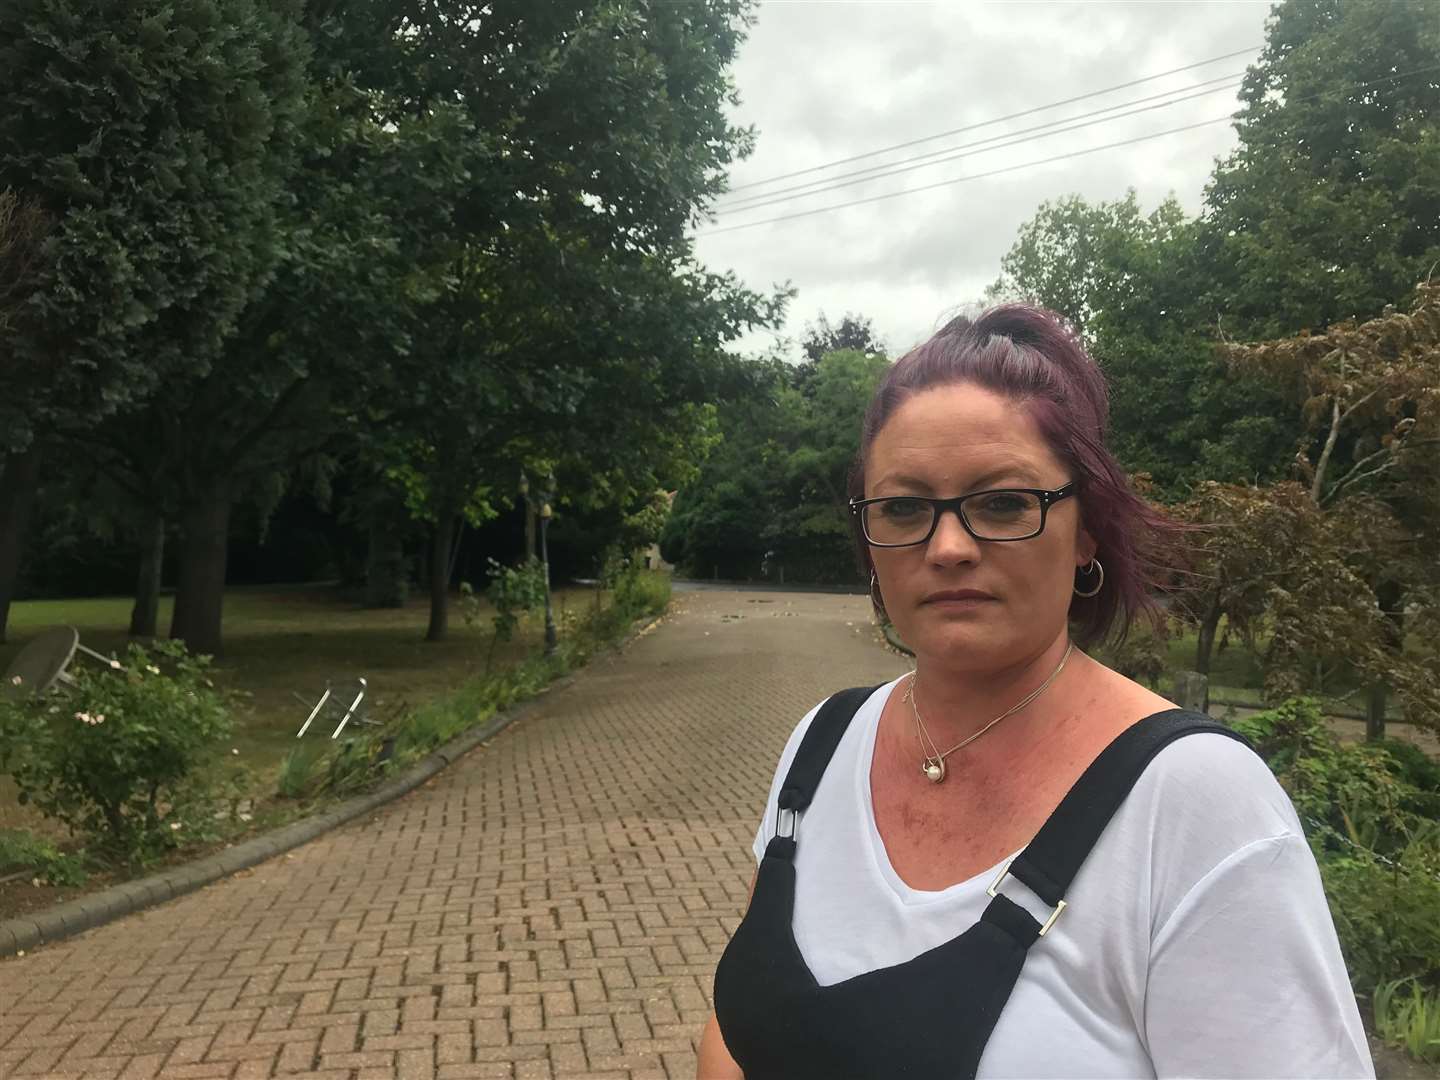 Stacey Epps, an administrator at Highfield Care Home in Bekesbourne Lane, called the incident “bizarre and shocking”